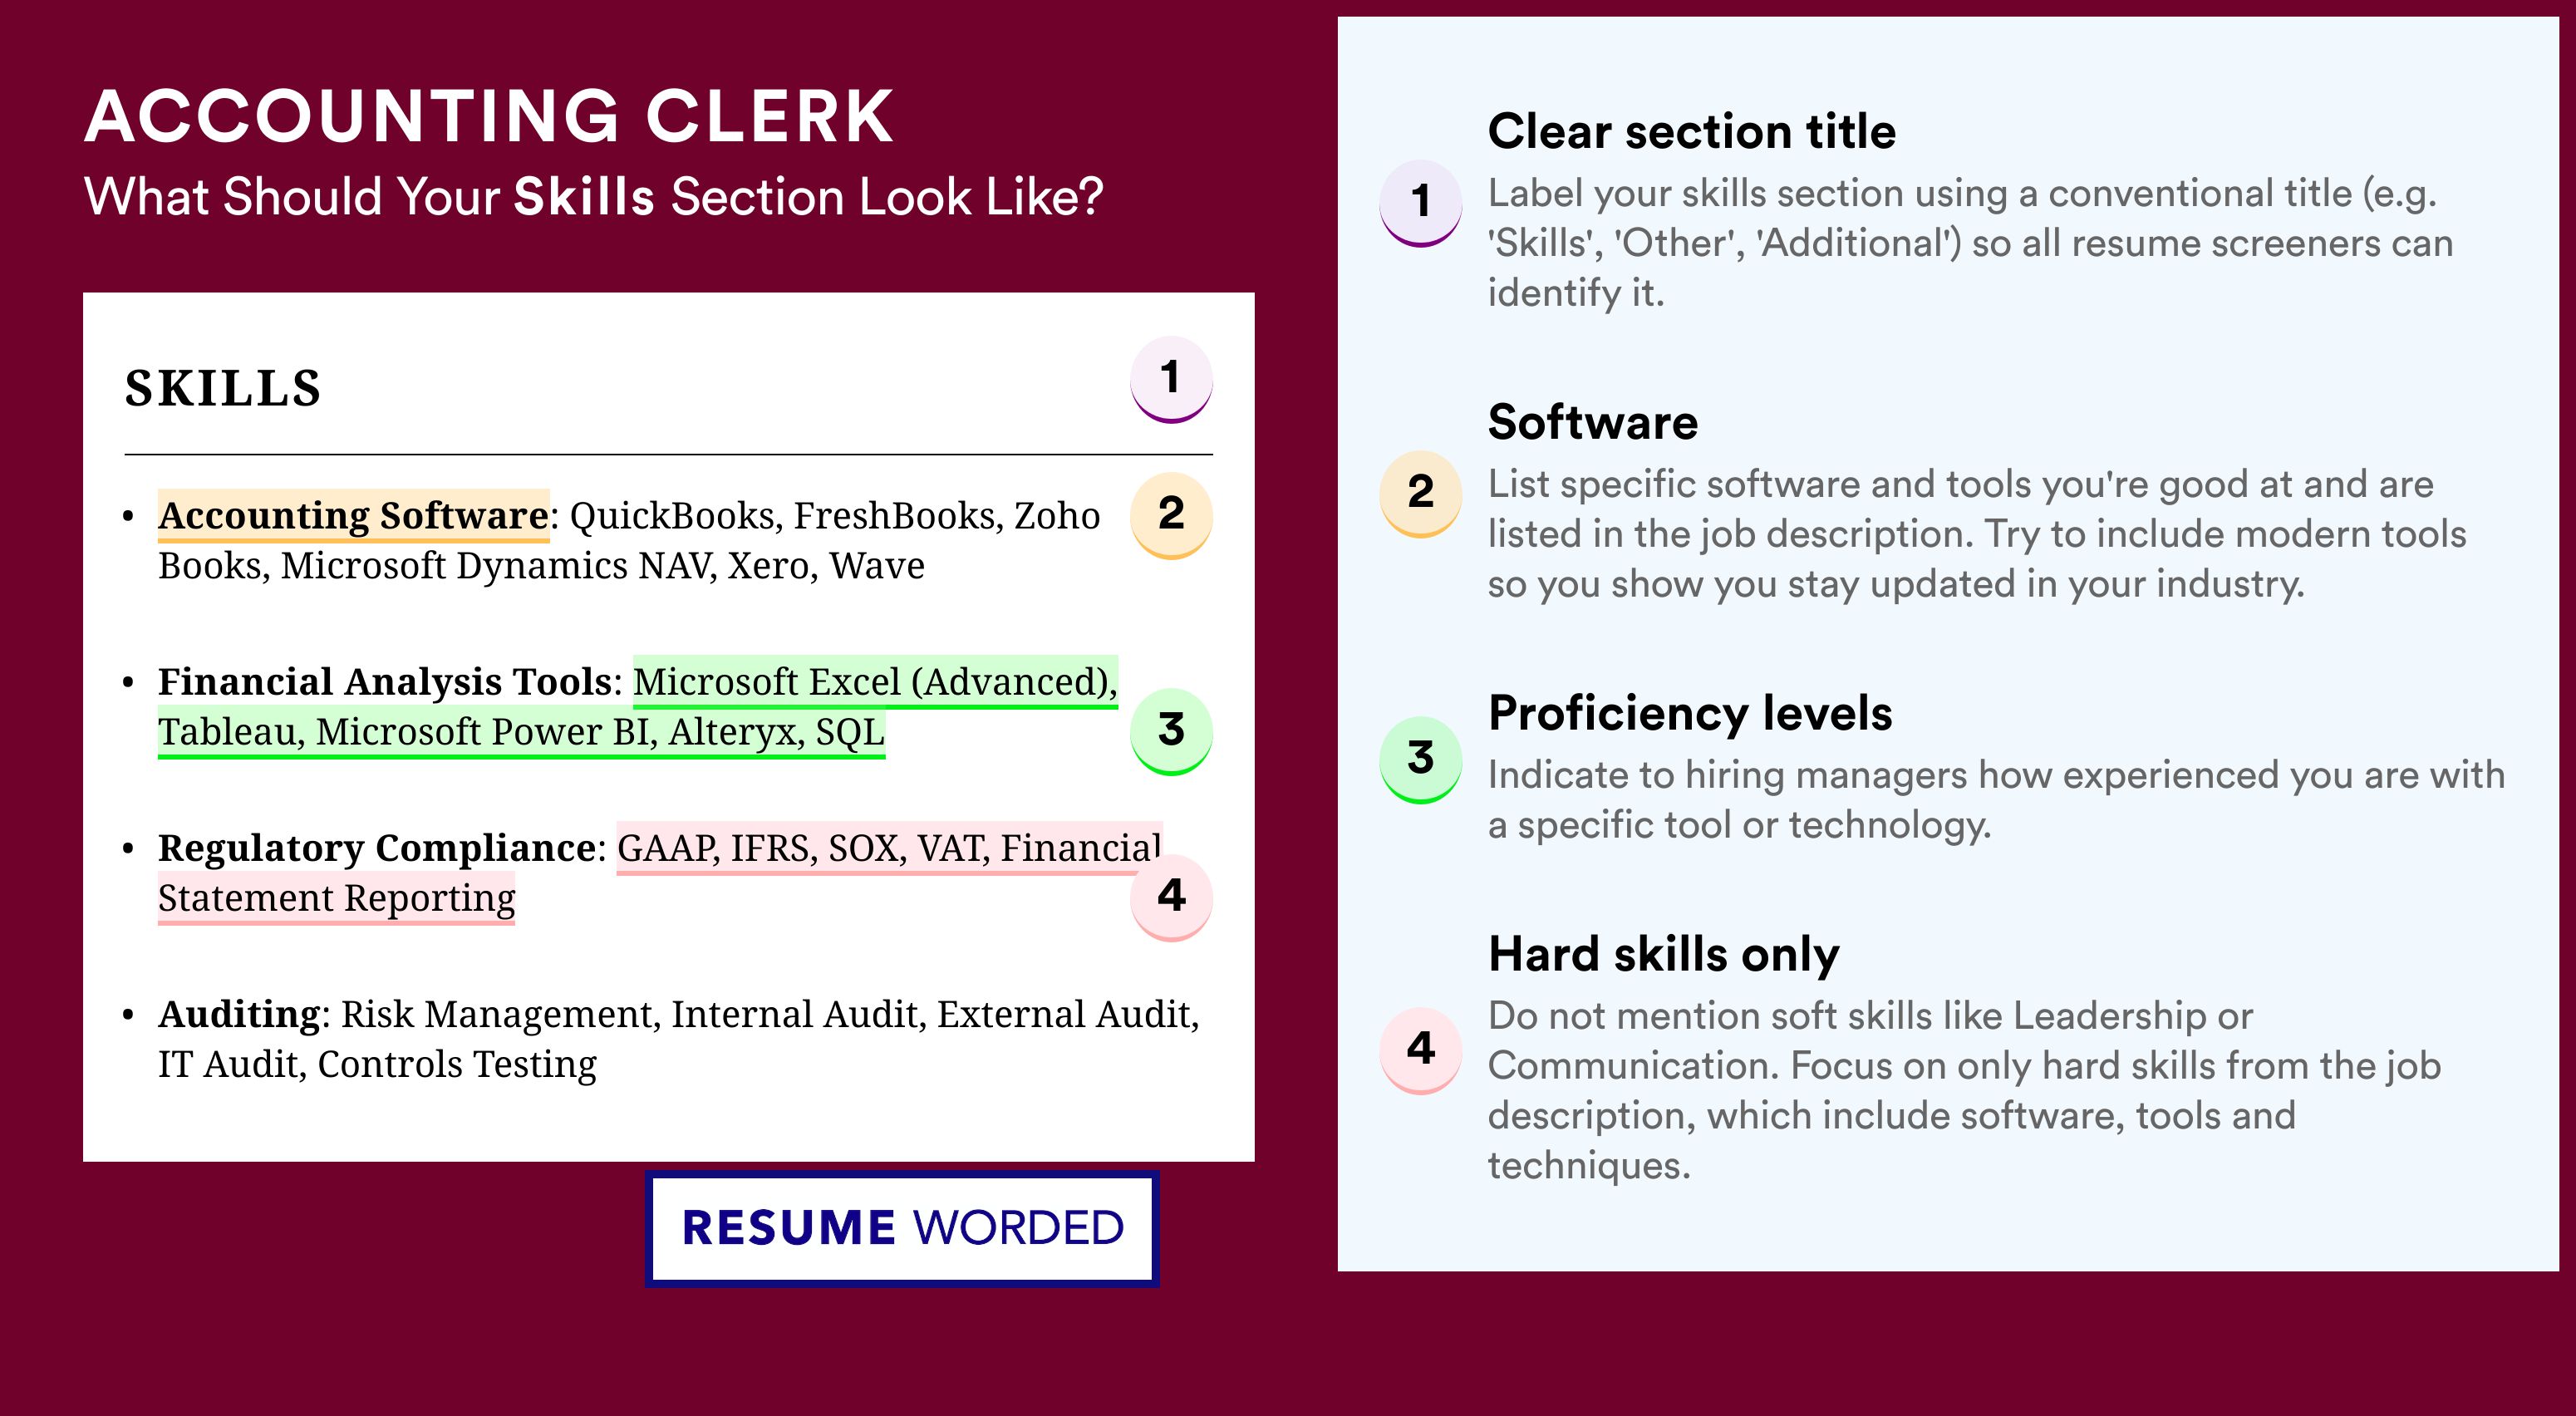 How To Write Your Skills Section - Accounting Clerk Roles